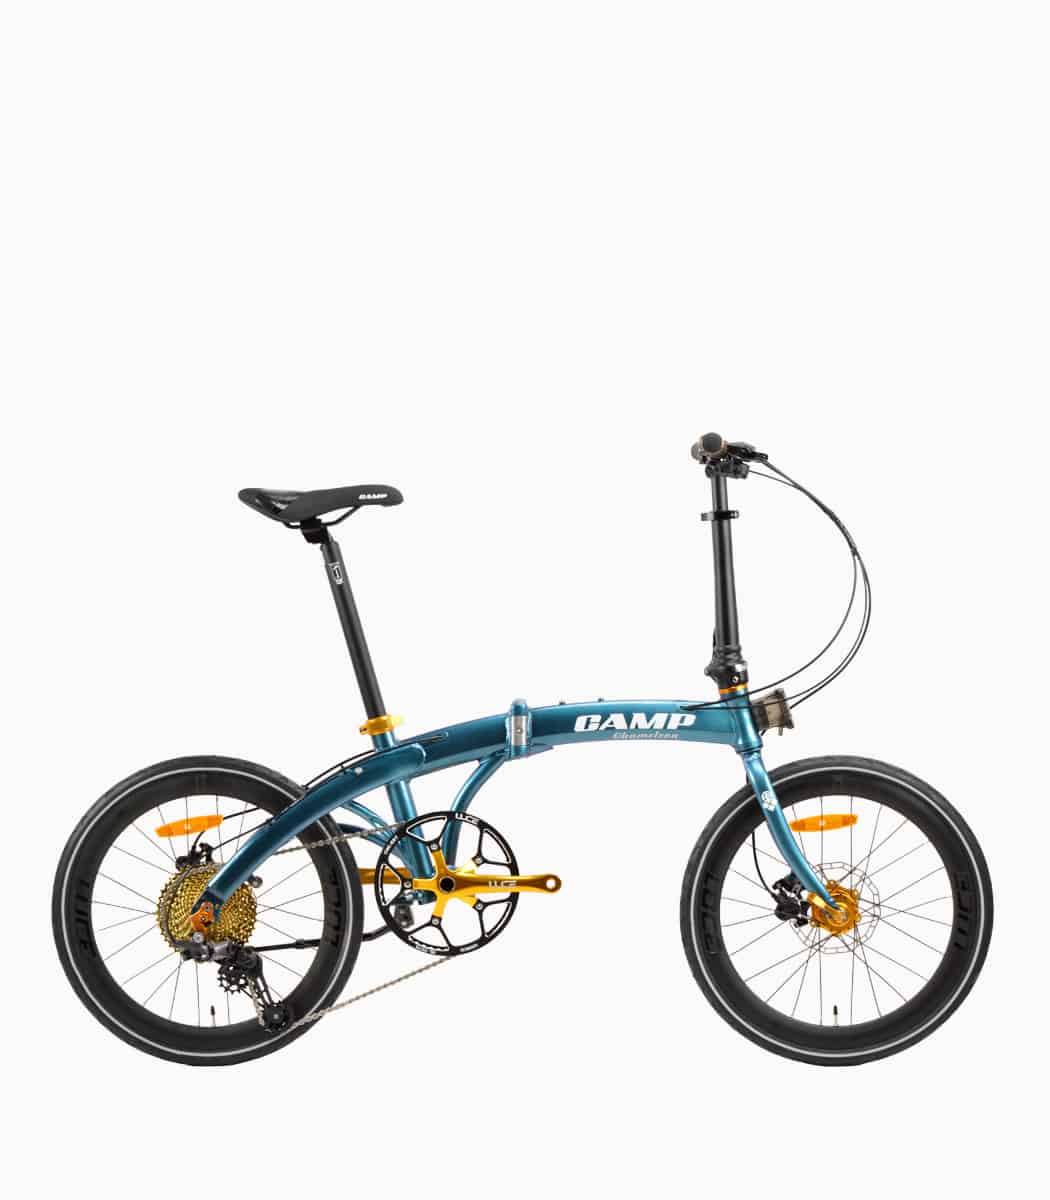 CAMP Chameleon GT (OCEAN BLUE) foldable bicycle right